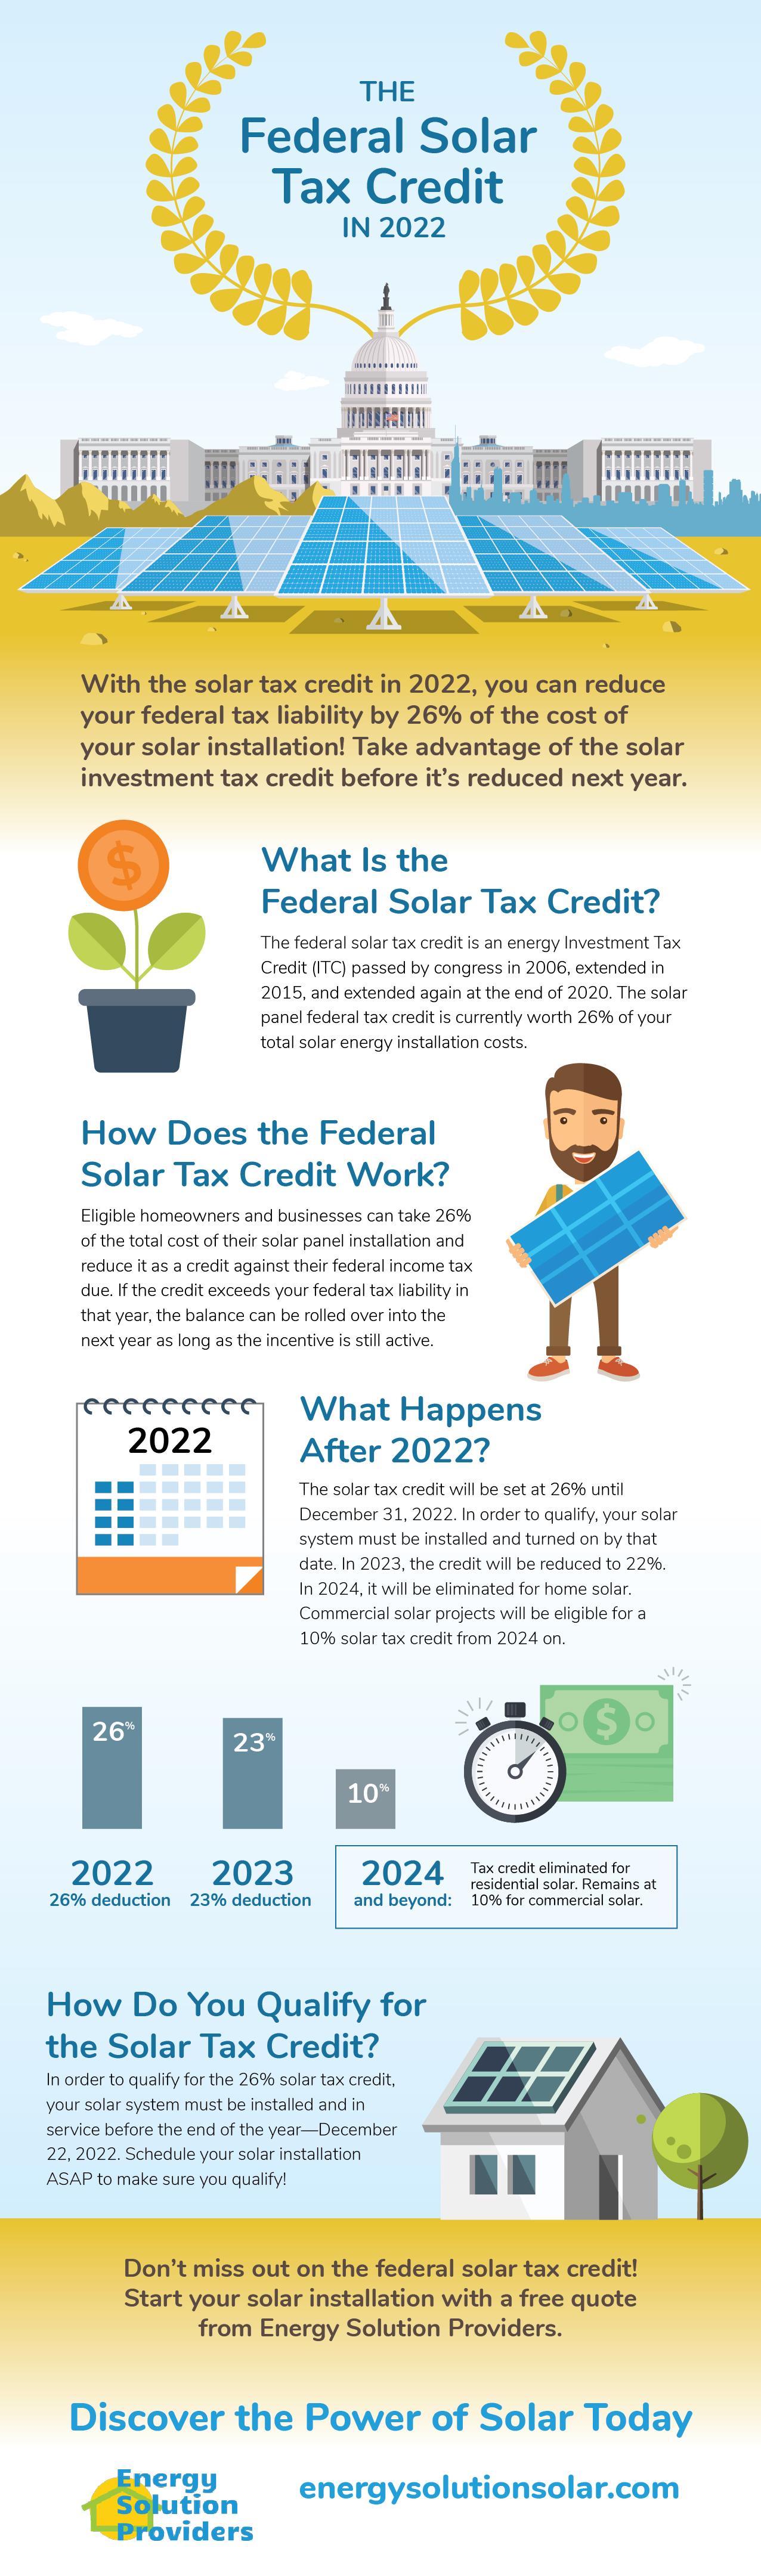 Federal solar tax credit infographic 2022